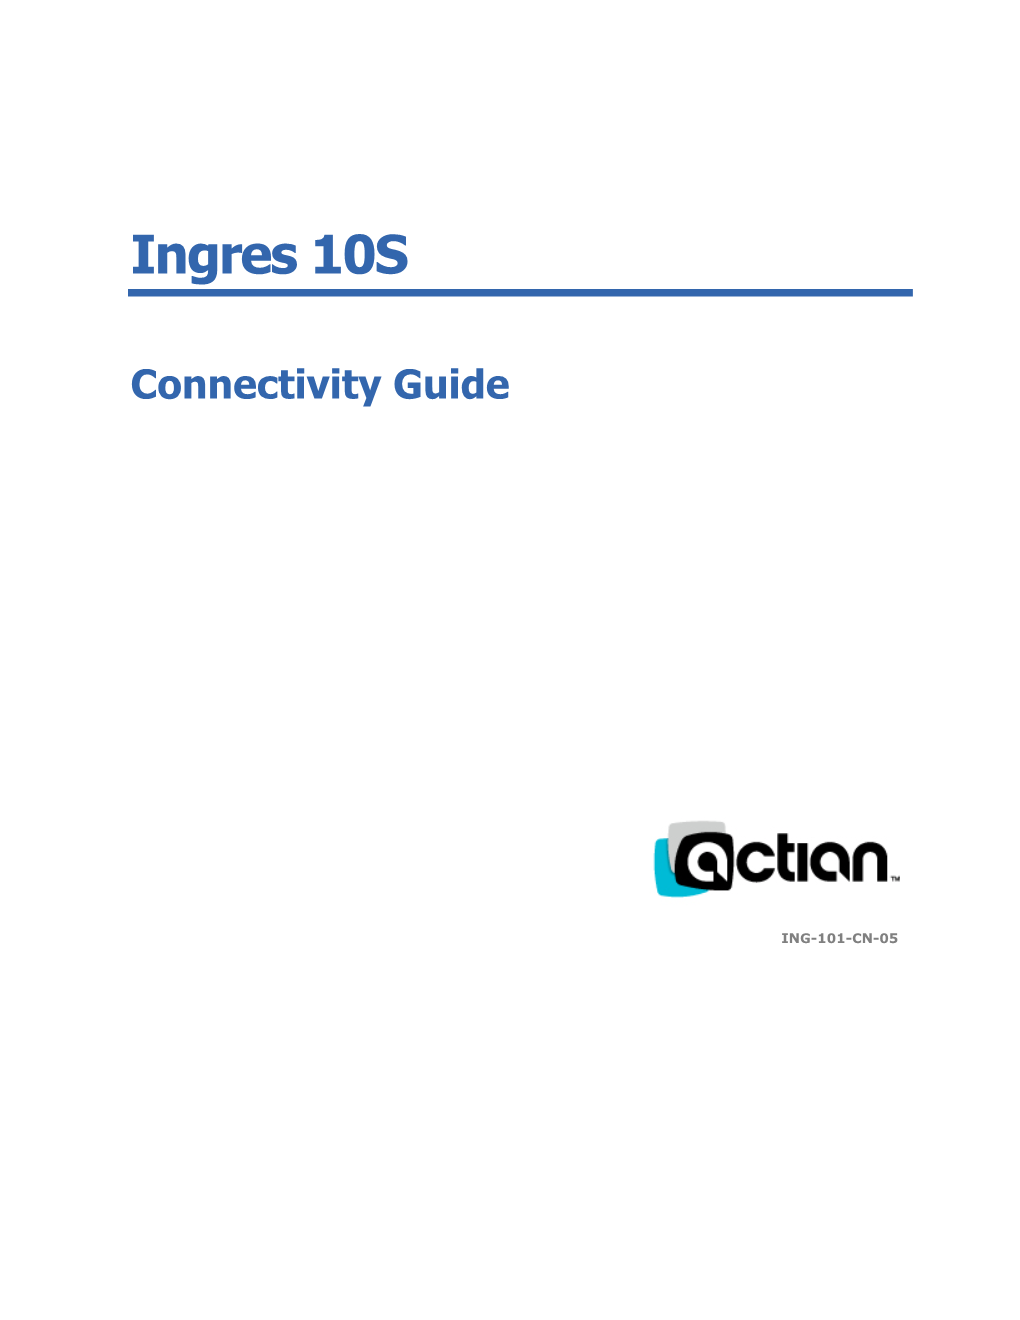 Ingres 10.1 Connectivity Guide